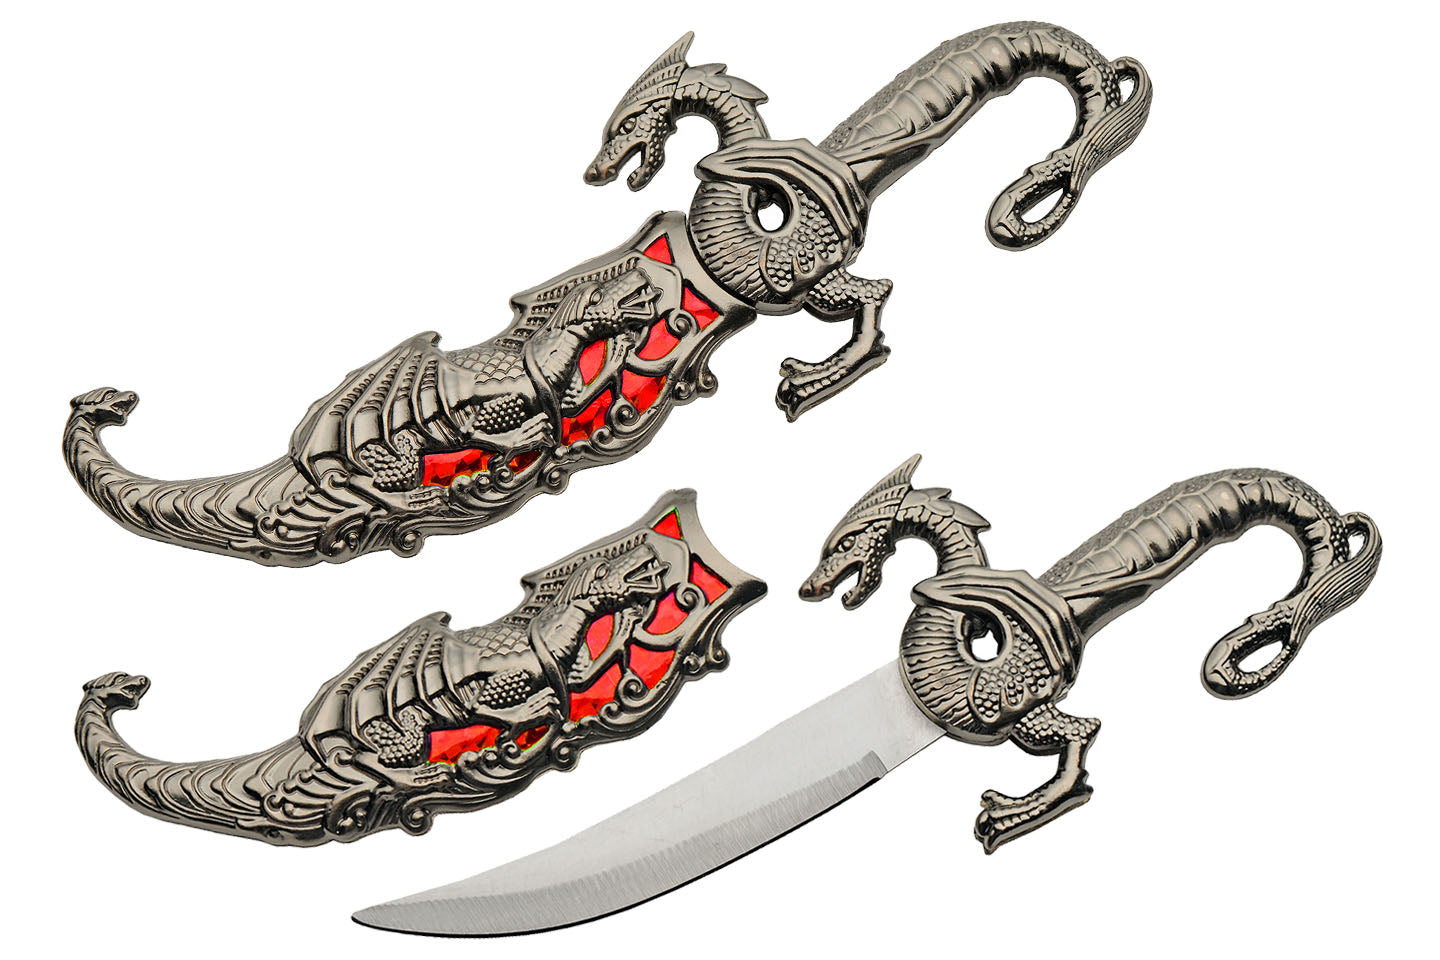 Fantasy Dragon Knife - Flame Red